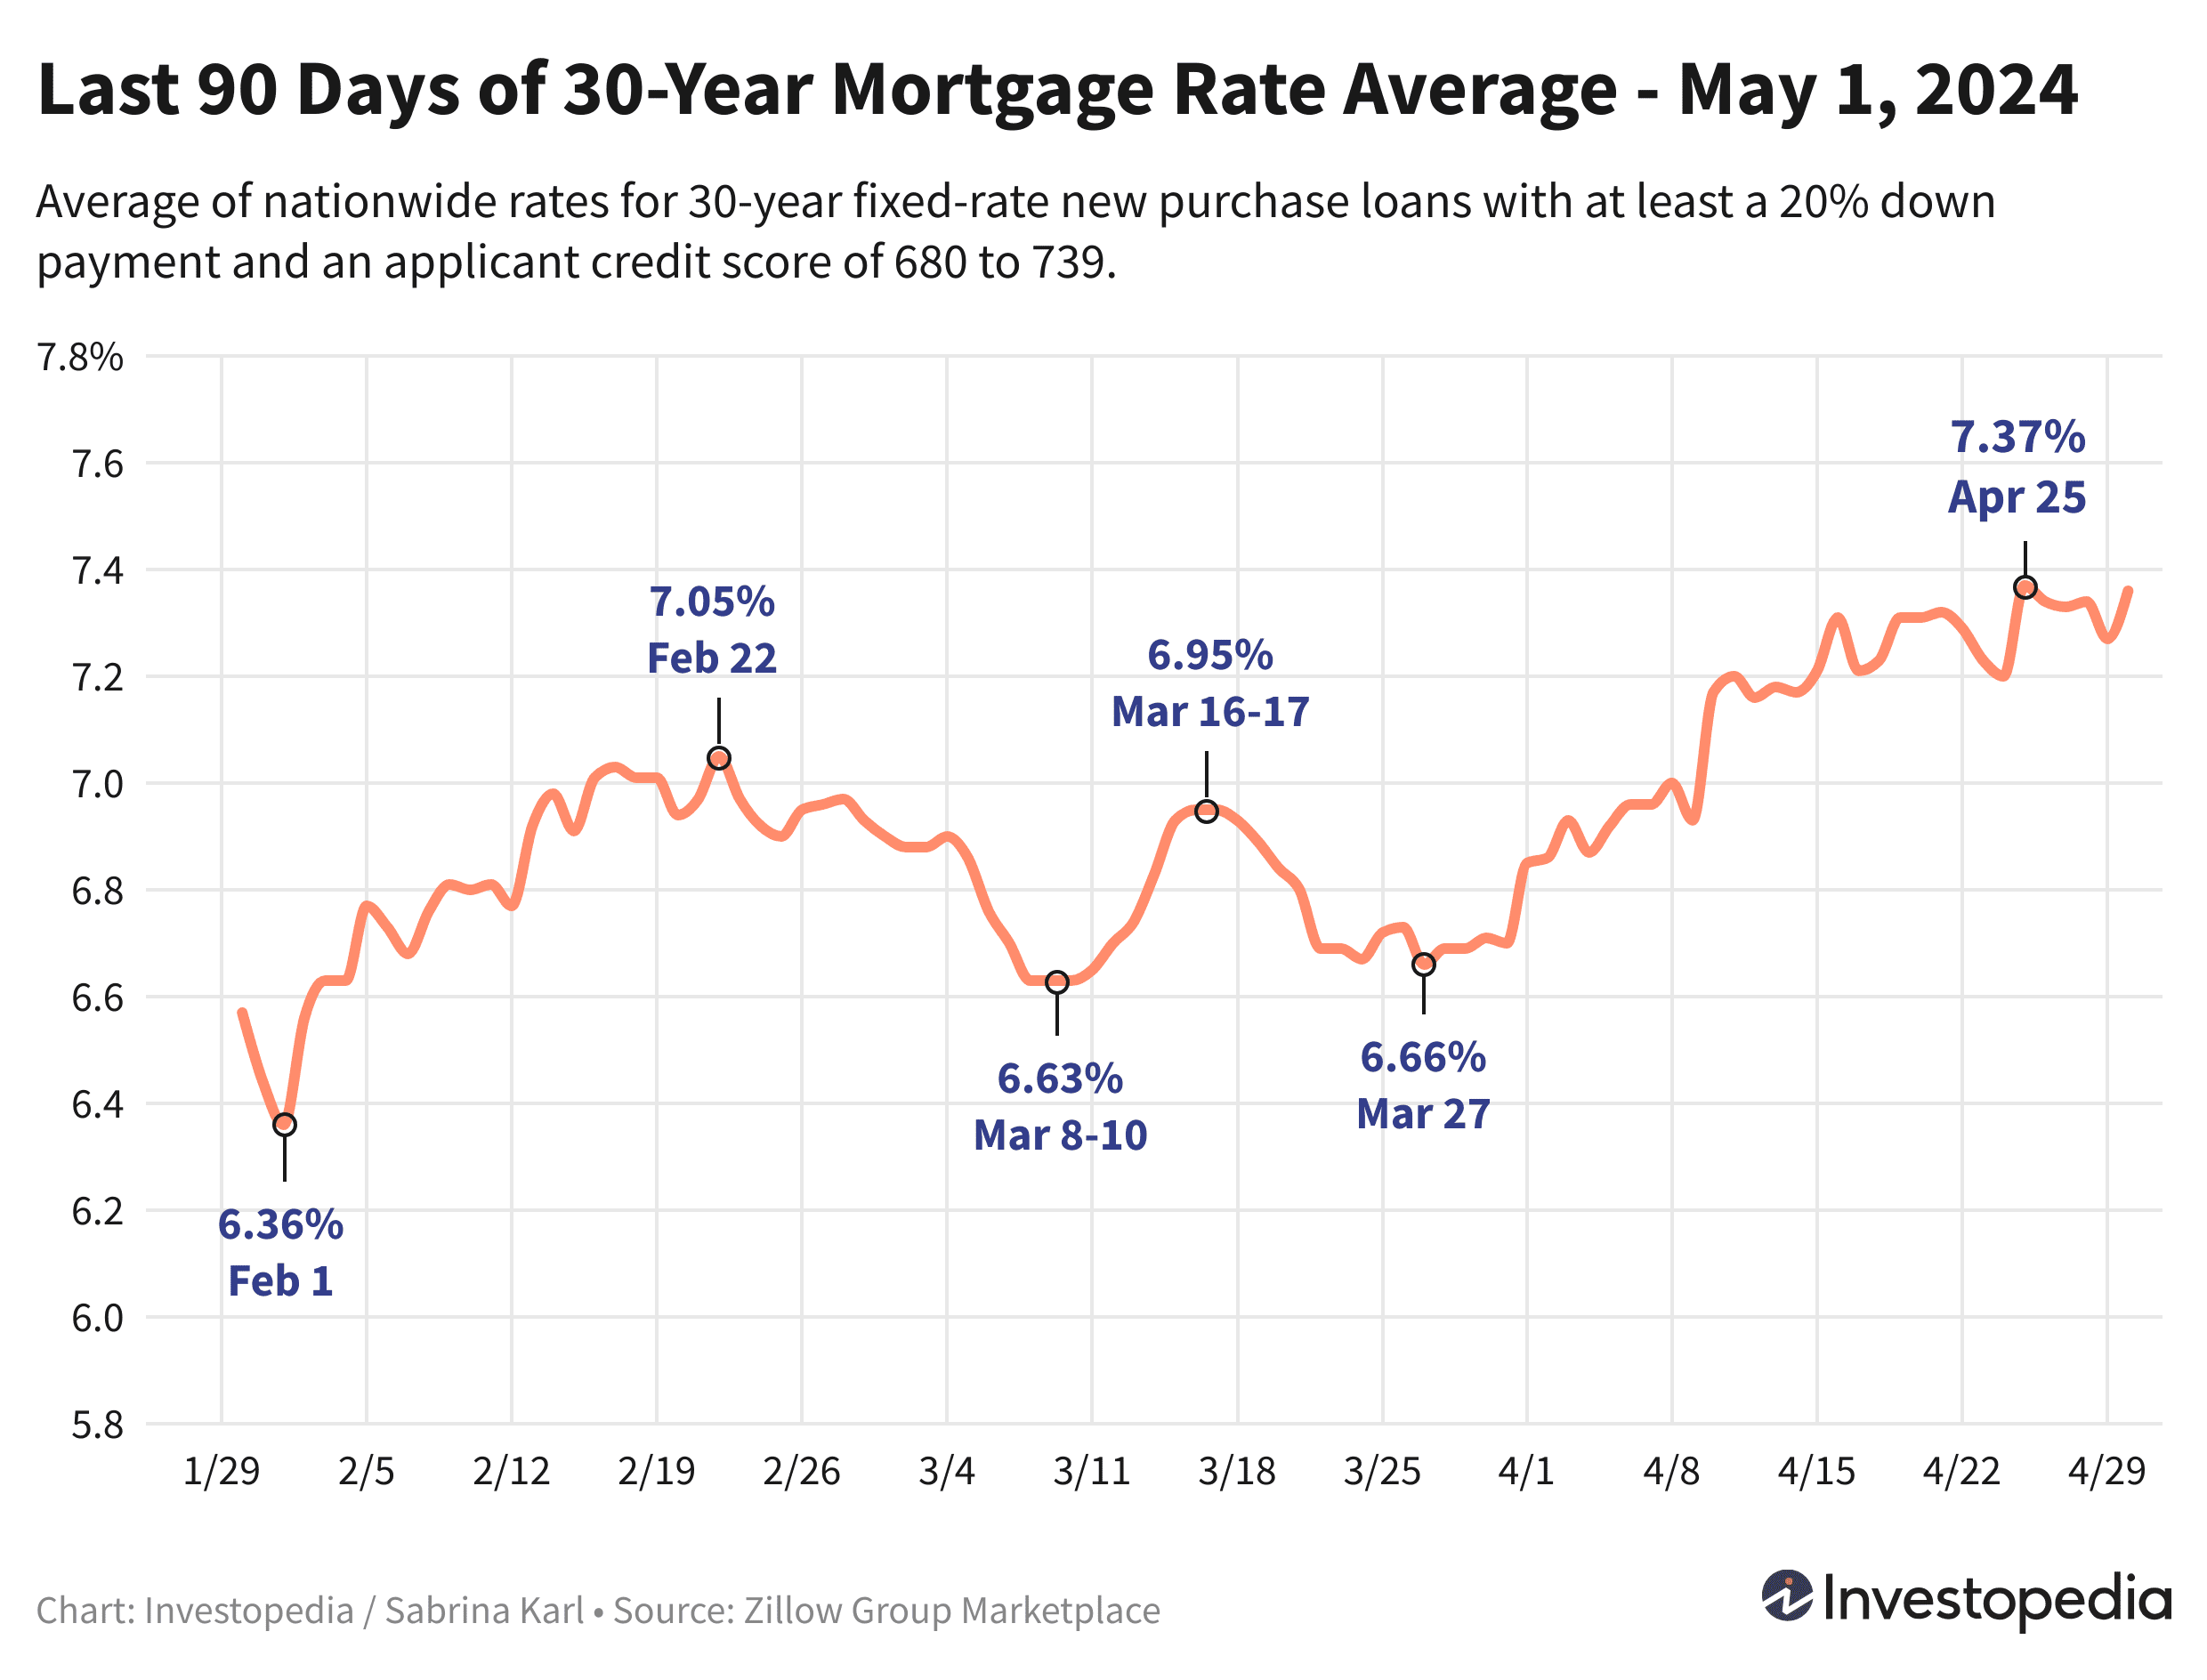 Line graph showing the last 90 days of the 30-year new purchase mortgage rate average - May 1, 2024